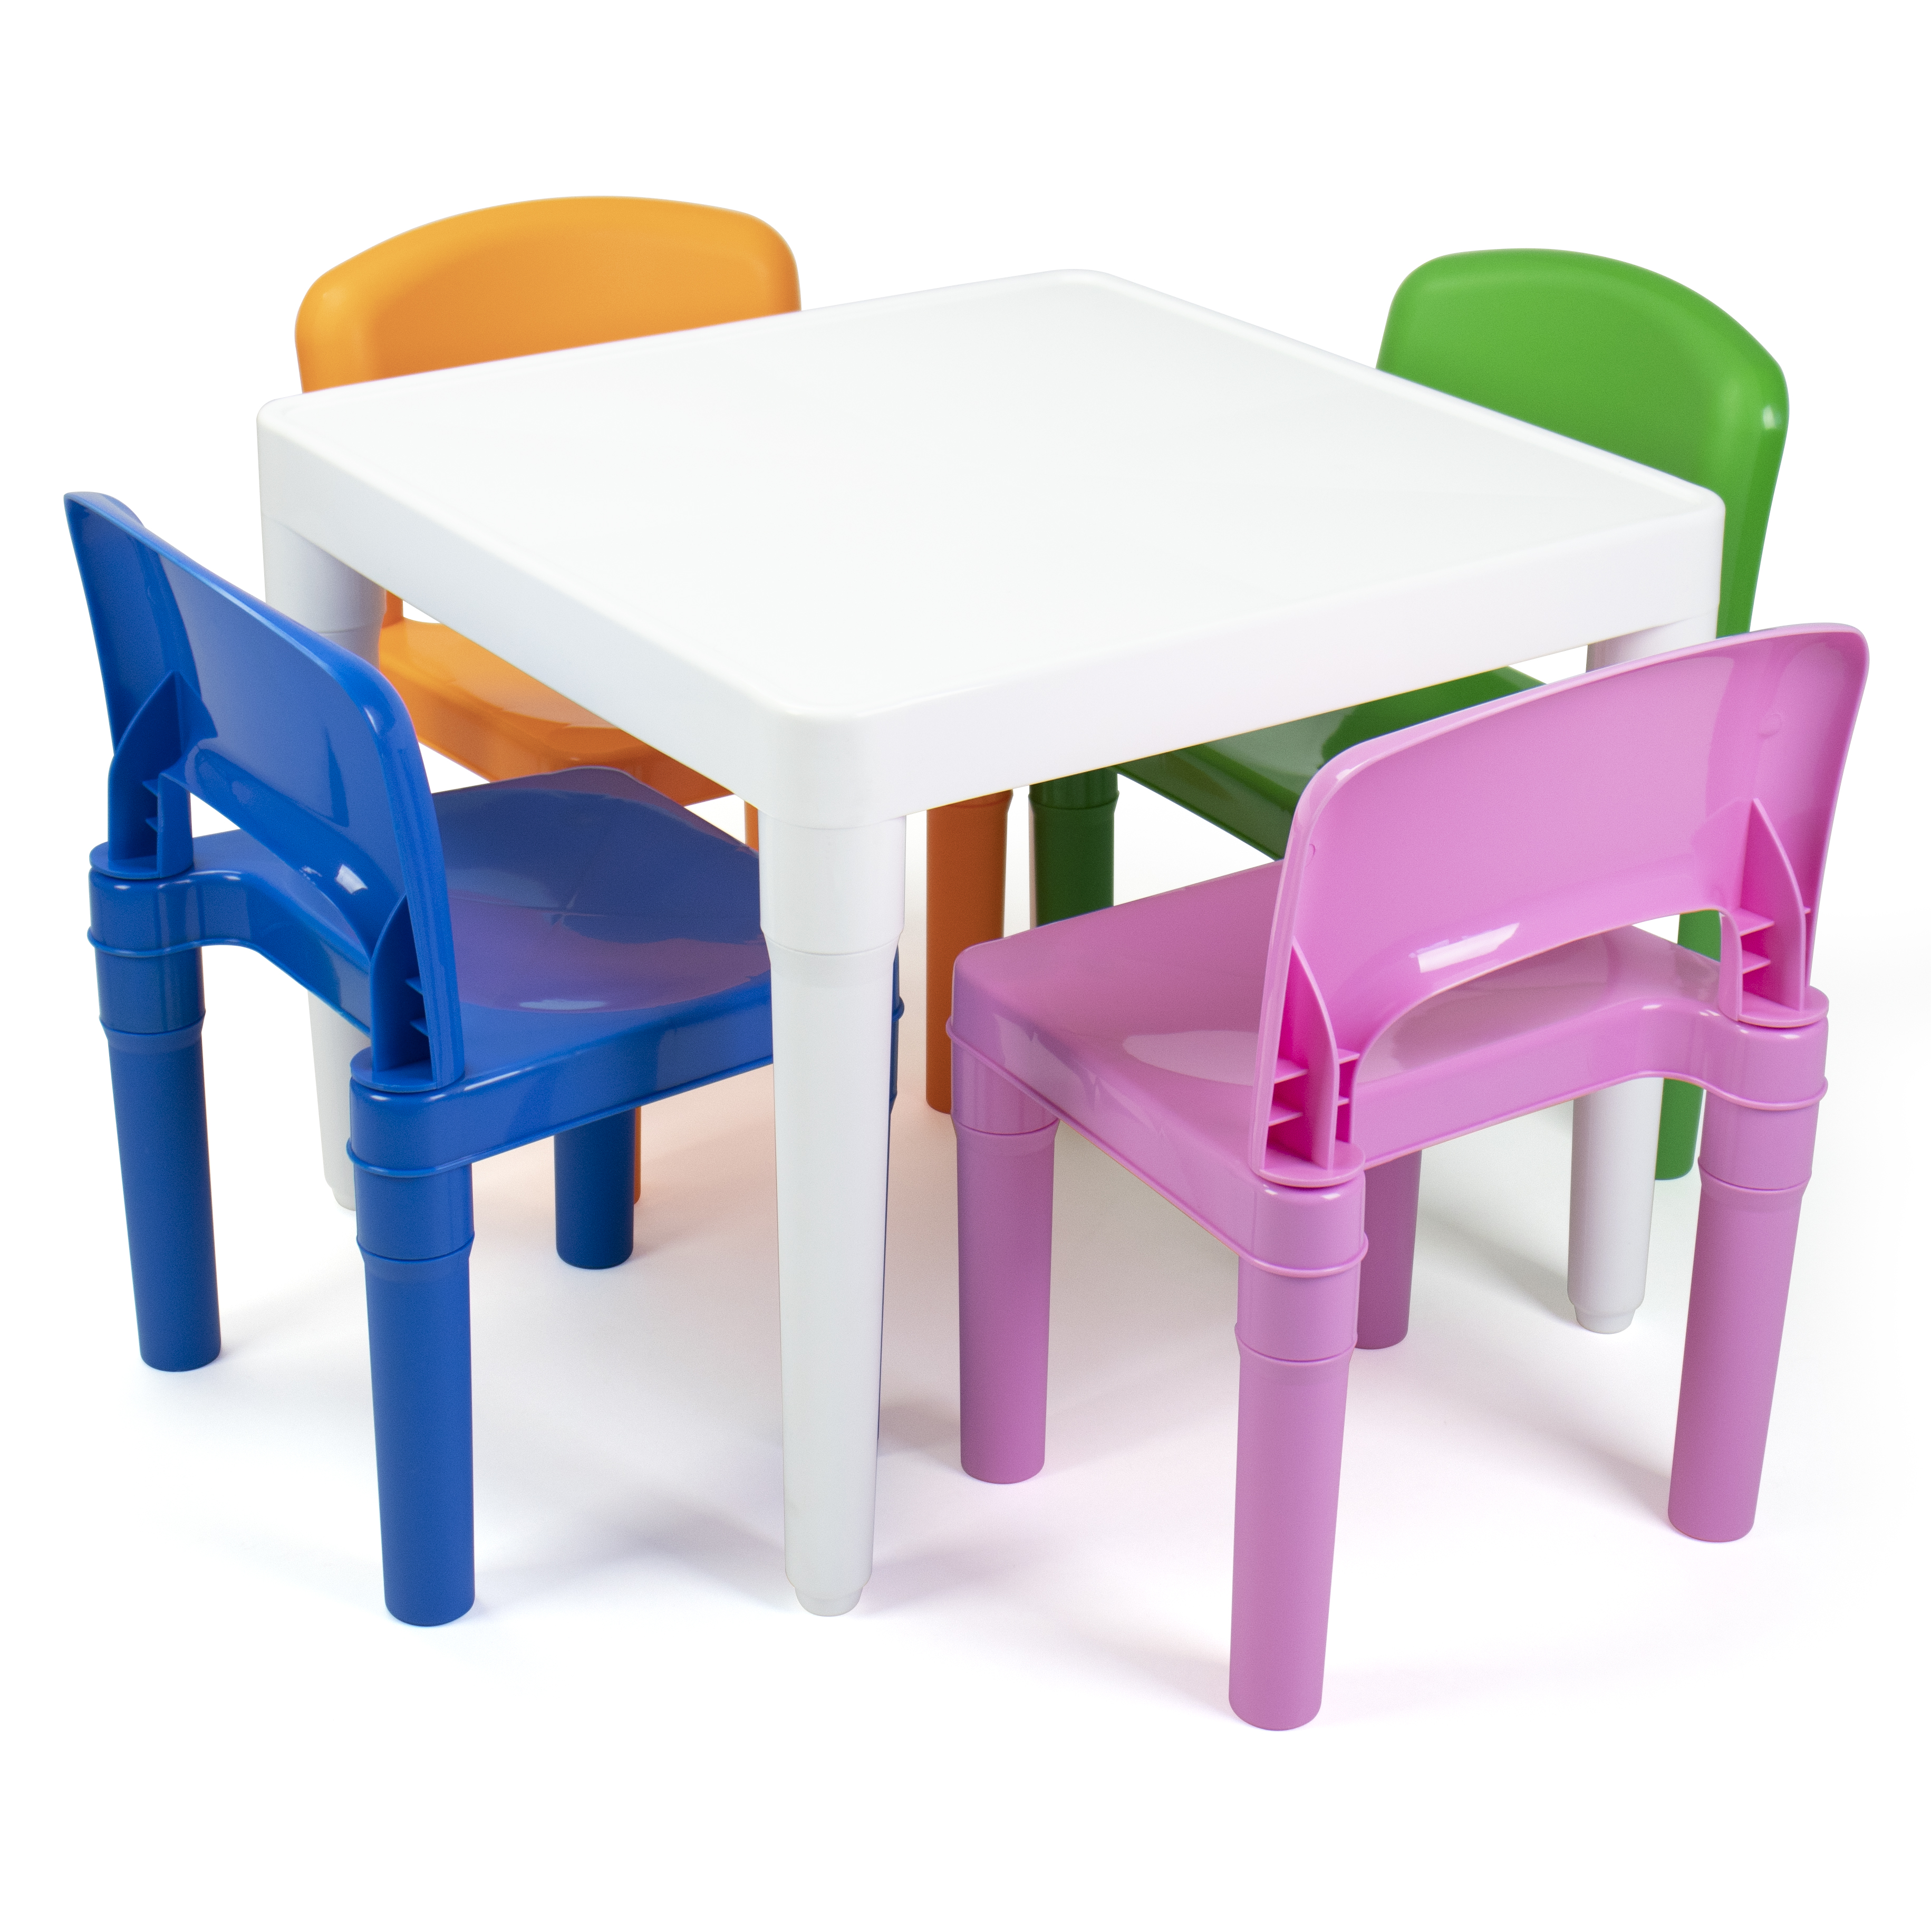 Humble Crew Lightweight Kids Plastic Dry Erase Table and 4 Chair Set, Multicolor - image 1 of 8